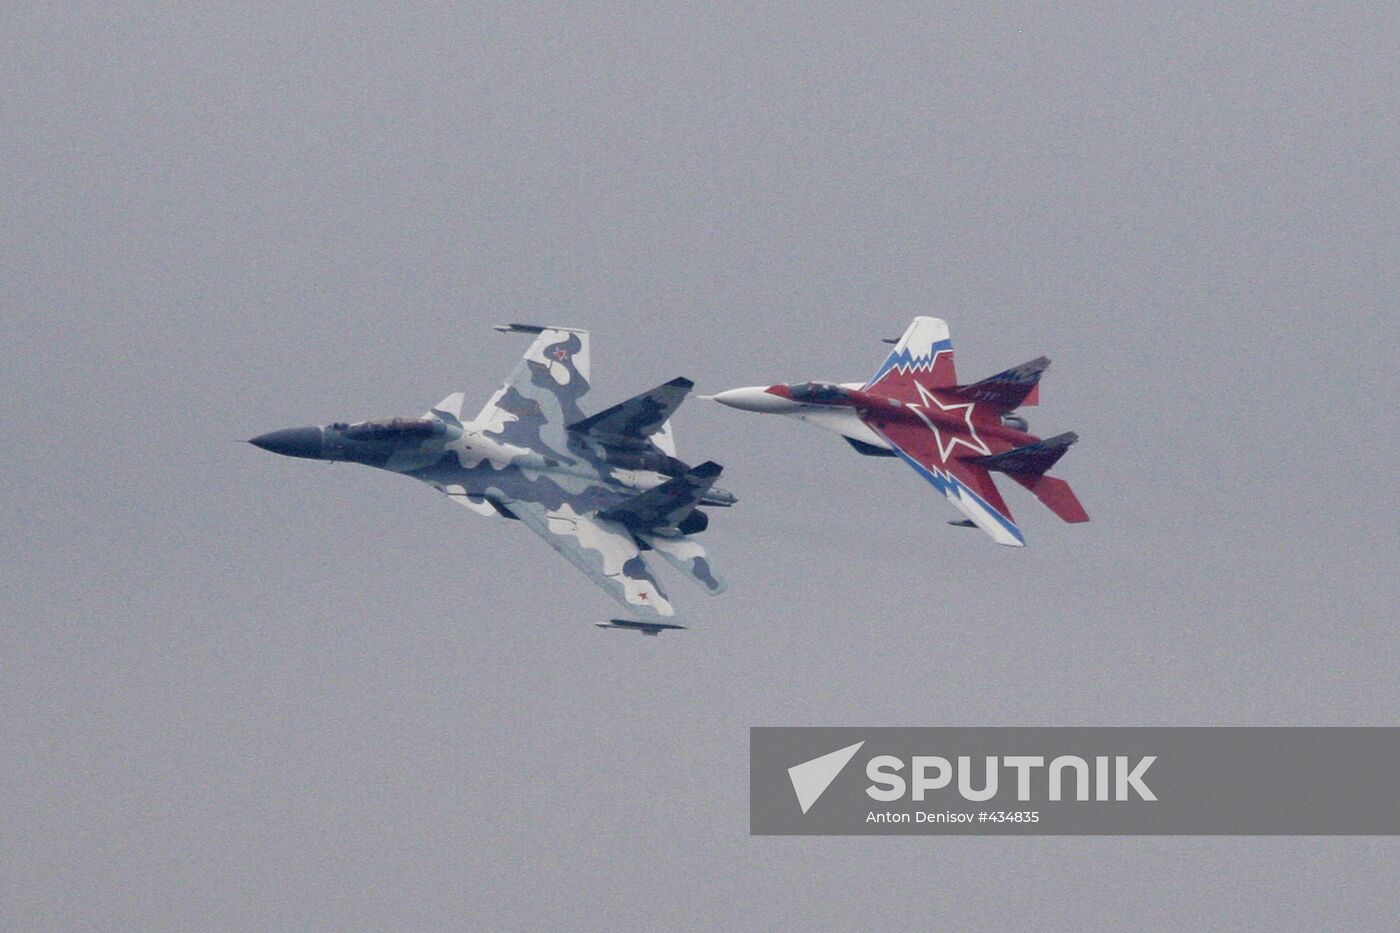 Su-30 MKI multirole fighter jet and MiG-29 jet fighter aircraft